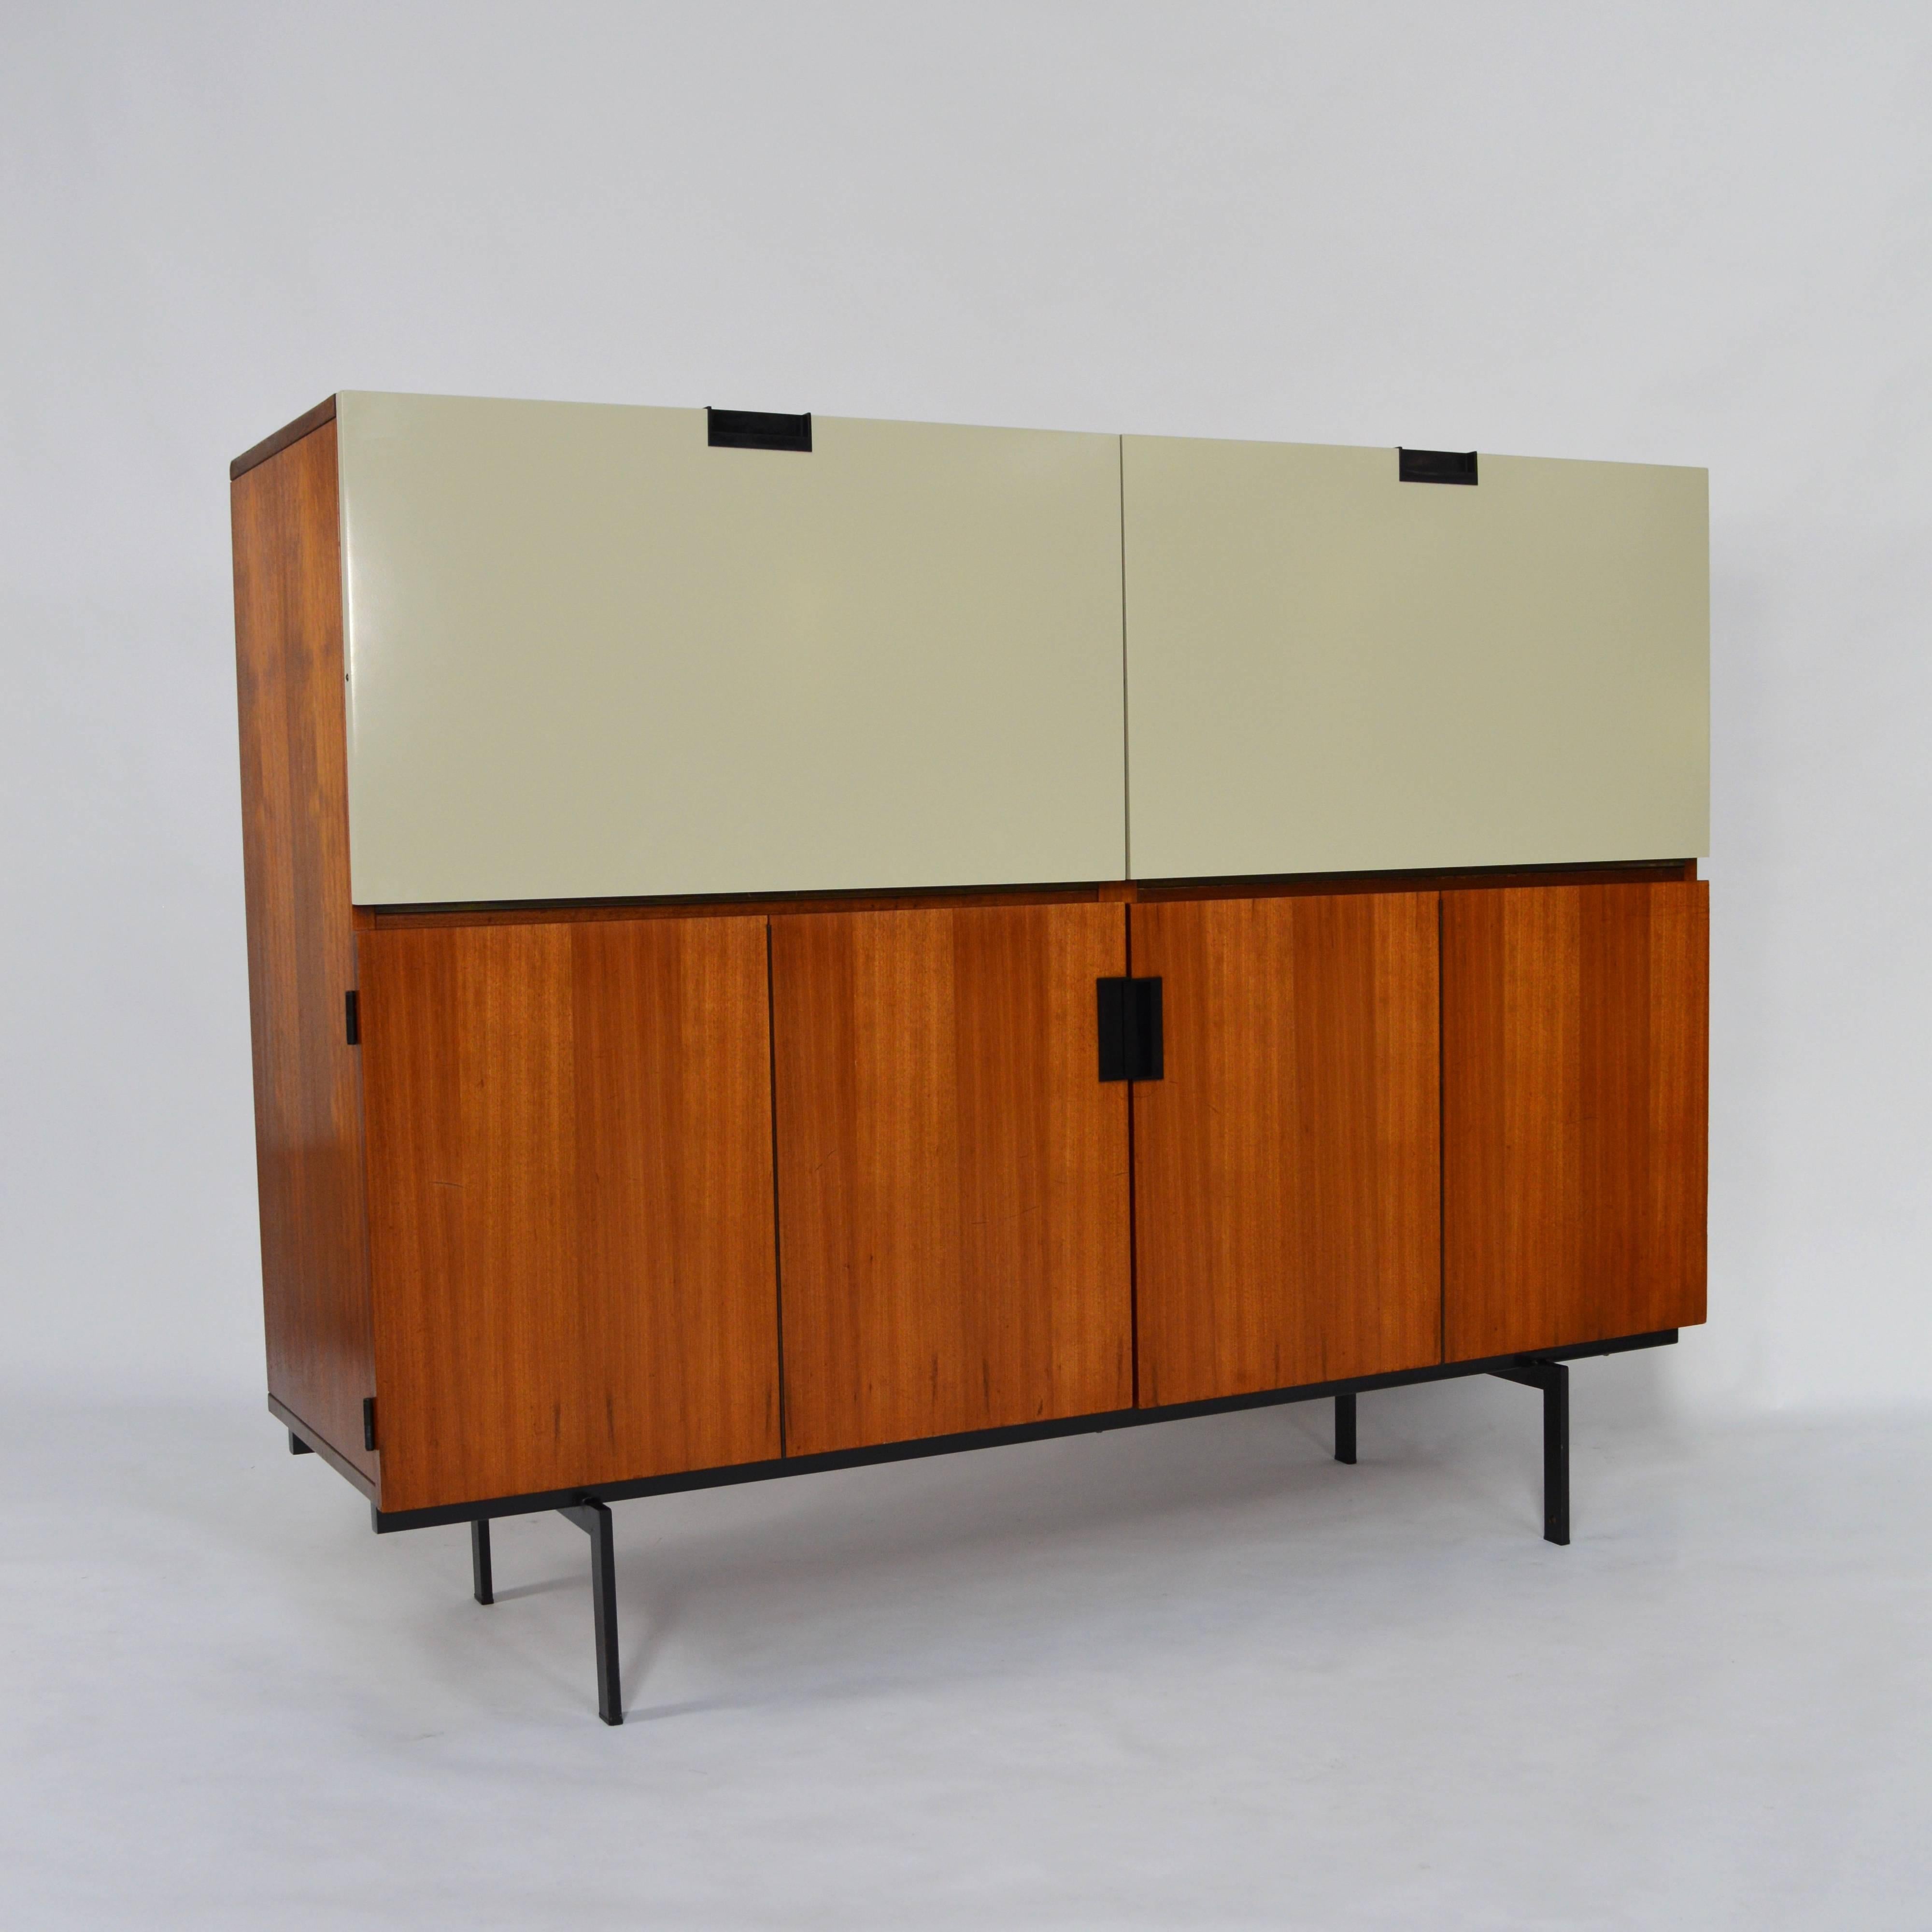 CU07 'Japanese Series' cabinet by Cees Braakman.
The cabinet holds a dry-bar part for bottles and glasses and a desk part with envelope storage and a small drawer.
Teak and off-white doors (original colour) with black metal base.
In very good